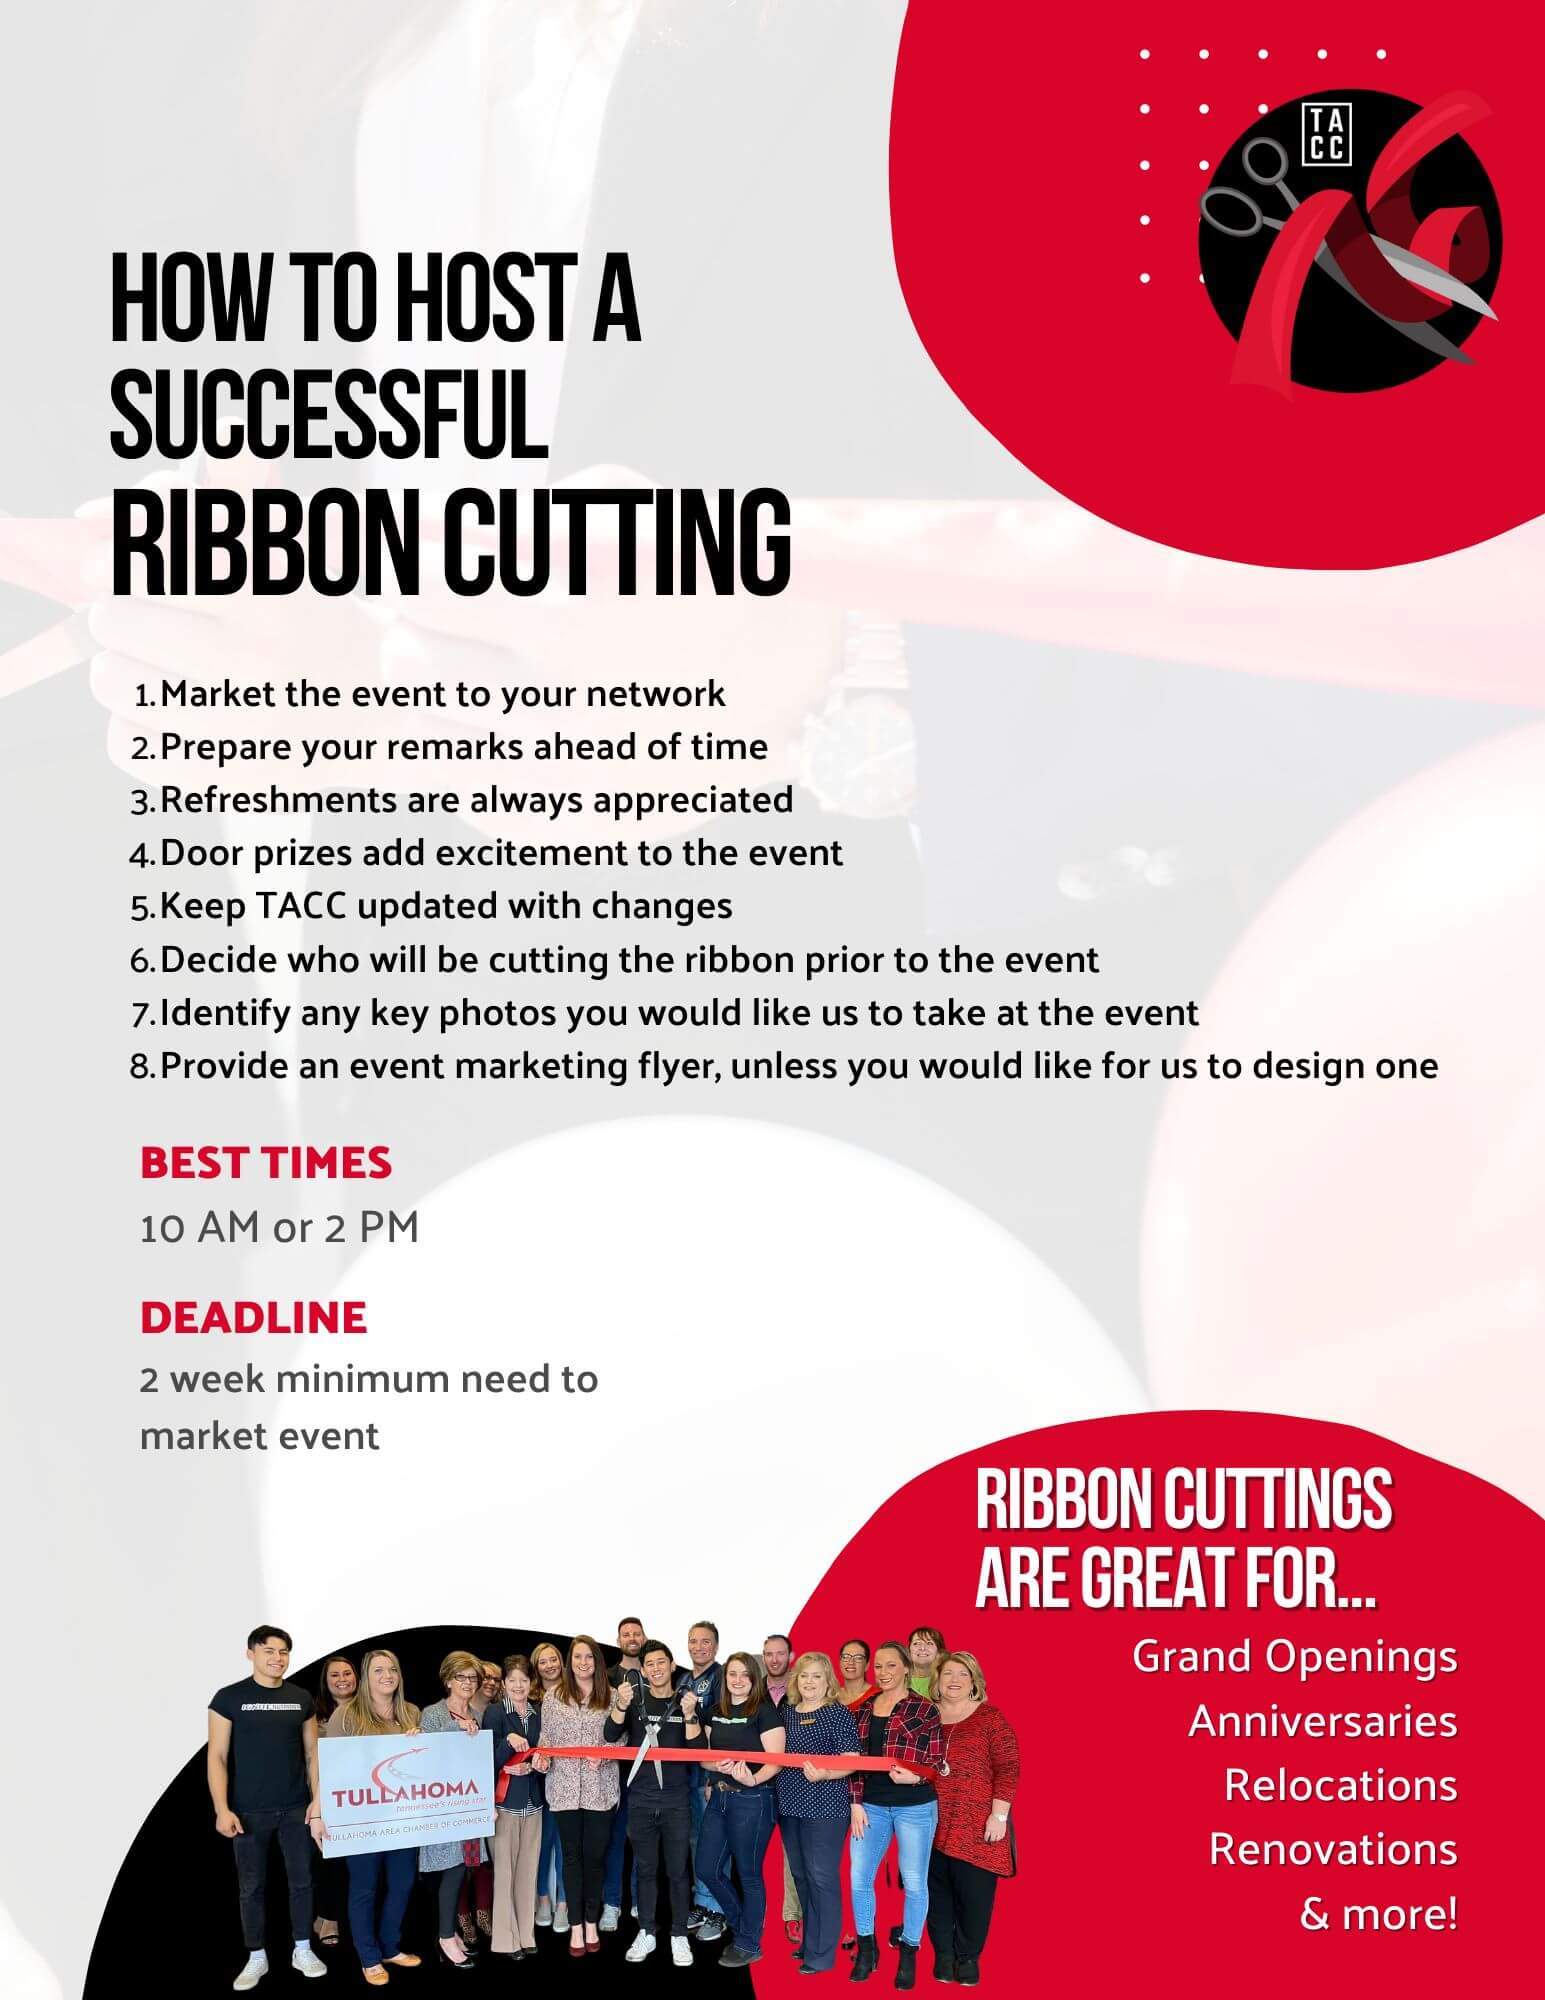 How to Host a Successful Ribbon Cutting